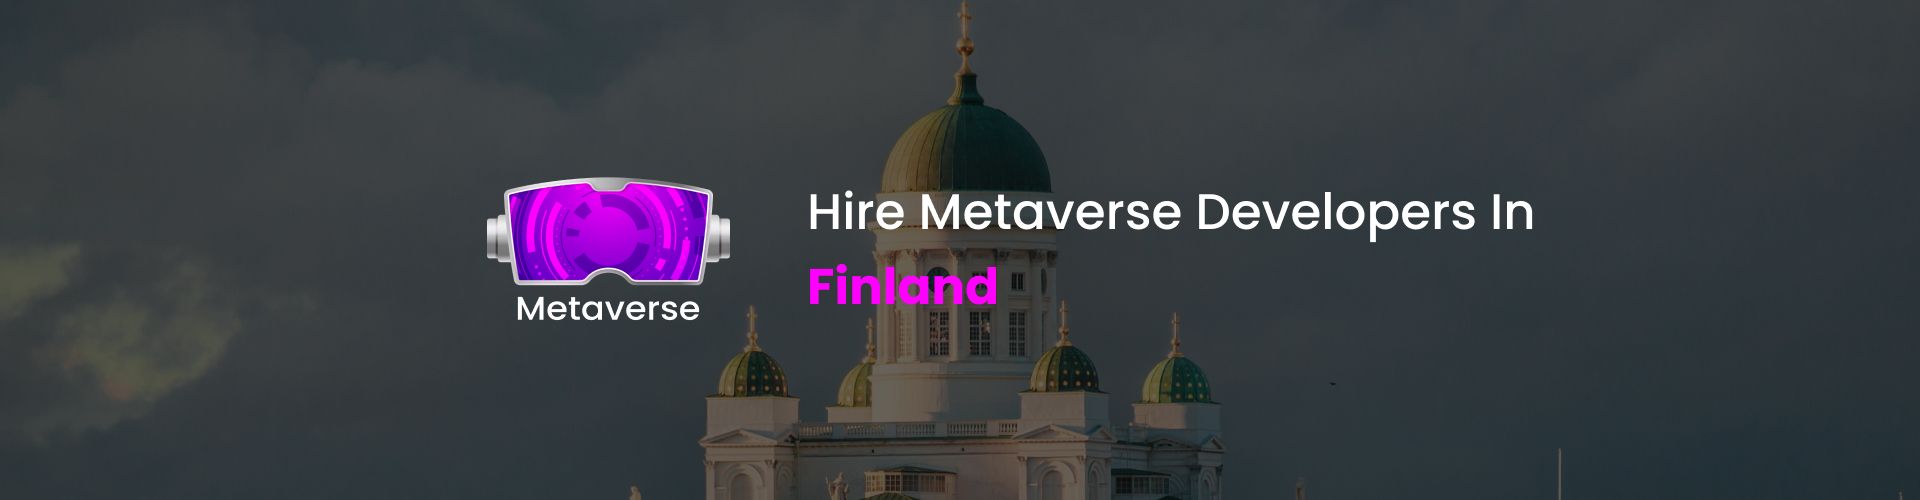 metaverse developers in finland